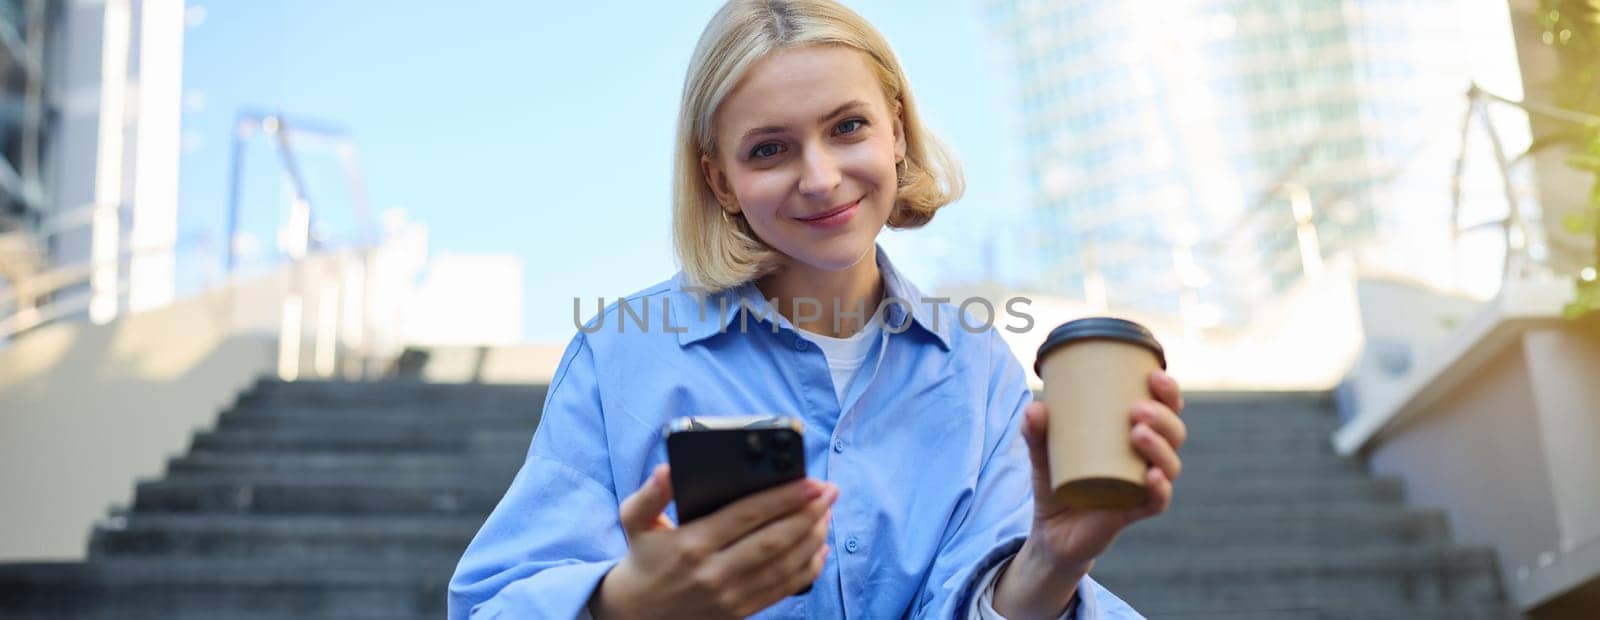 Portrait of beautiful blond woman, smiling girl student drinking coffee, sitting on stairs with smartphone, looking happy at camera.